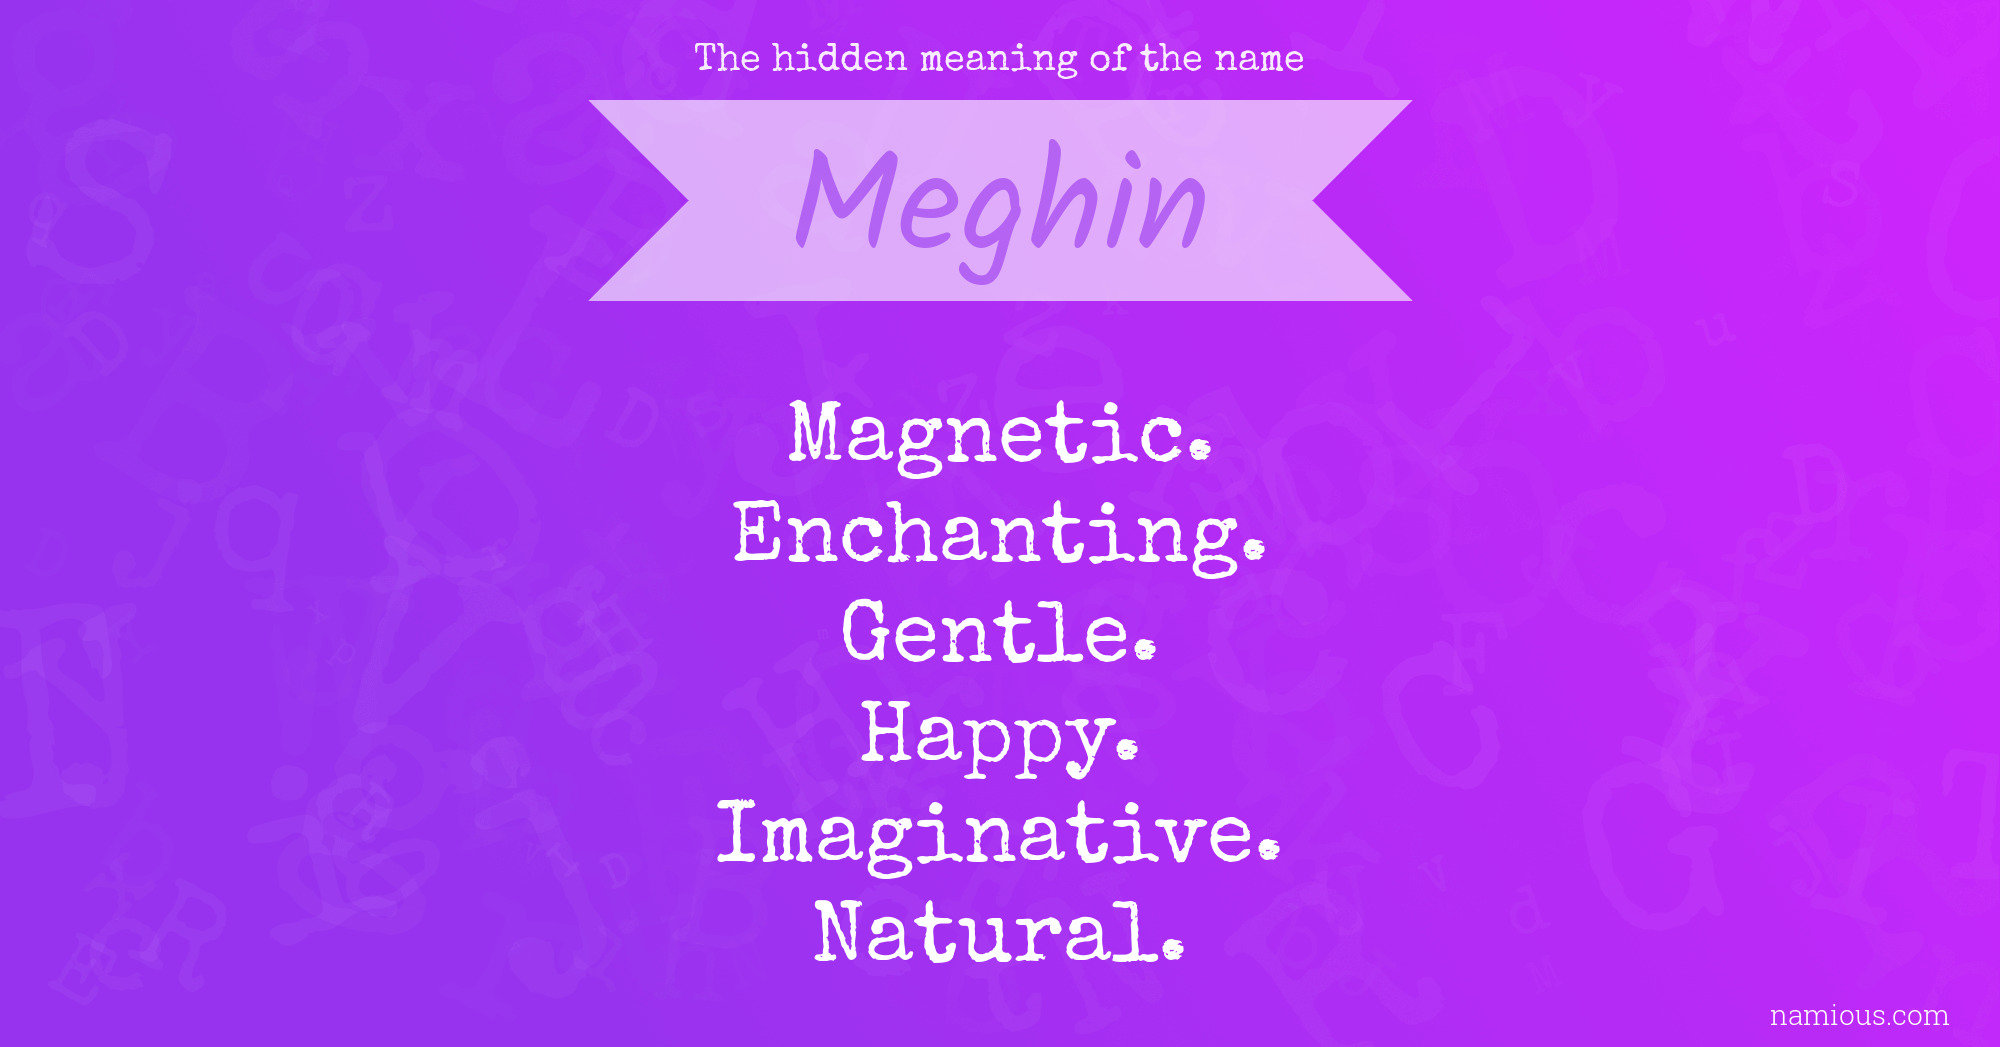 The hidden meaning of the name Meghin